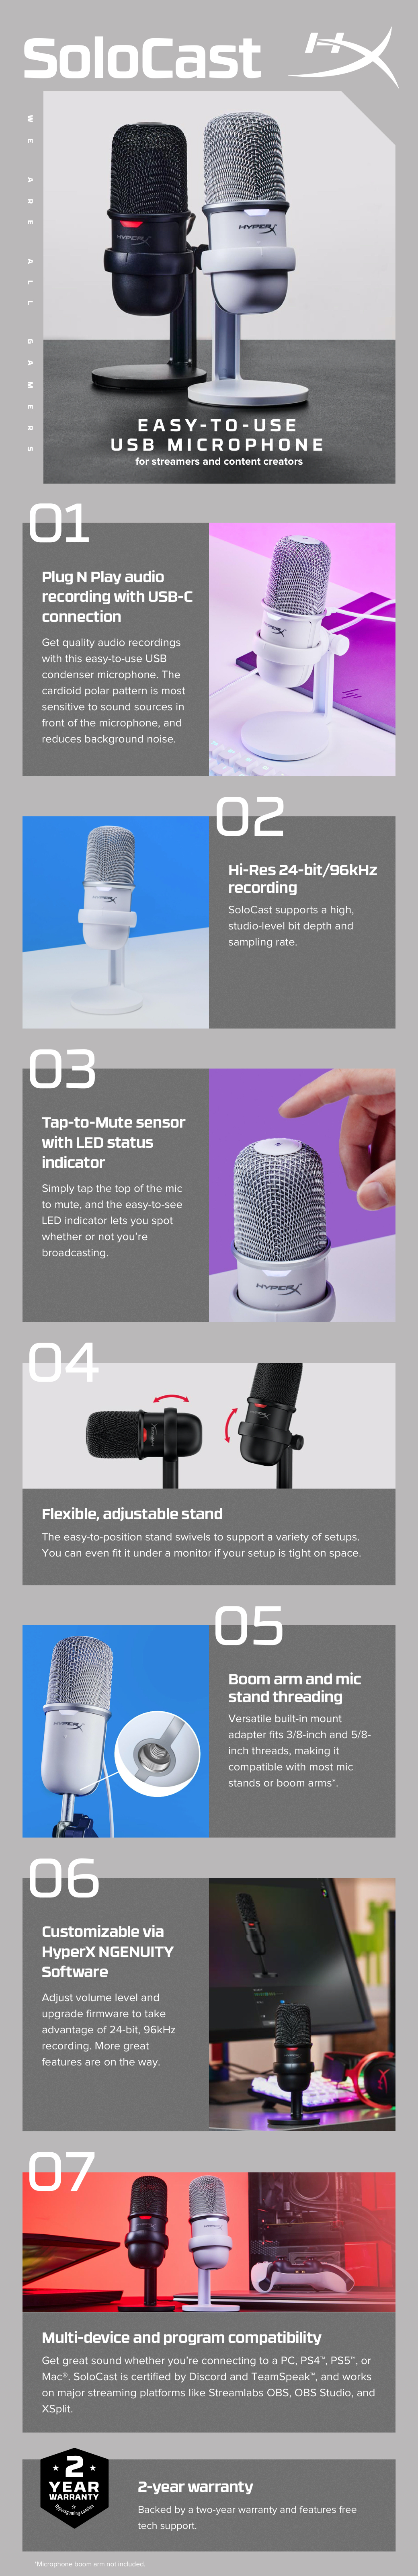 A large marketing image providing additional information about the product HyperX SoloCast - USB Condenser Microphone (White) - Additional alt info not provided